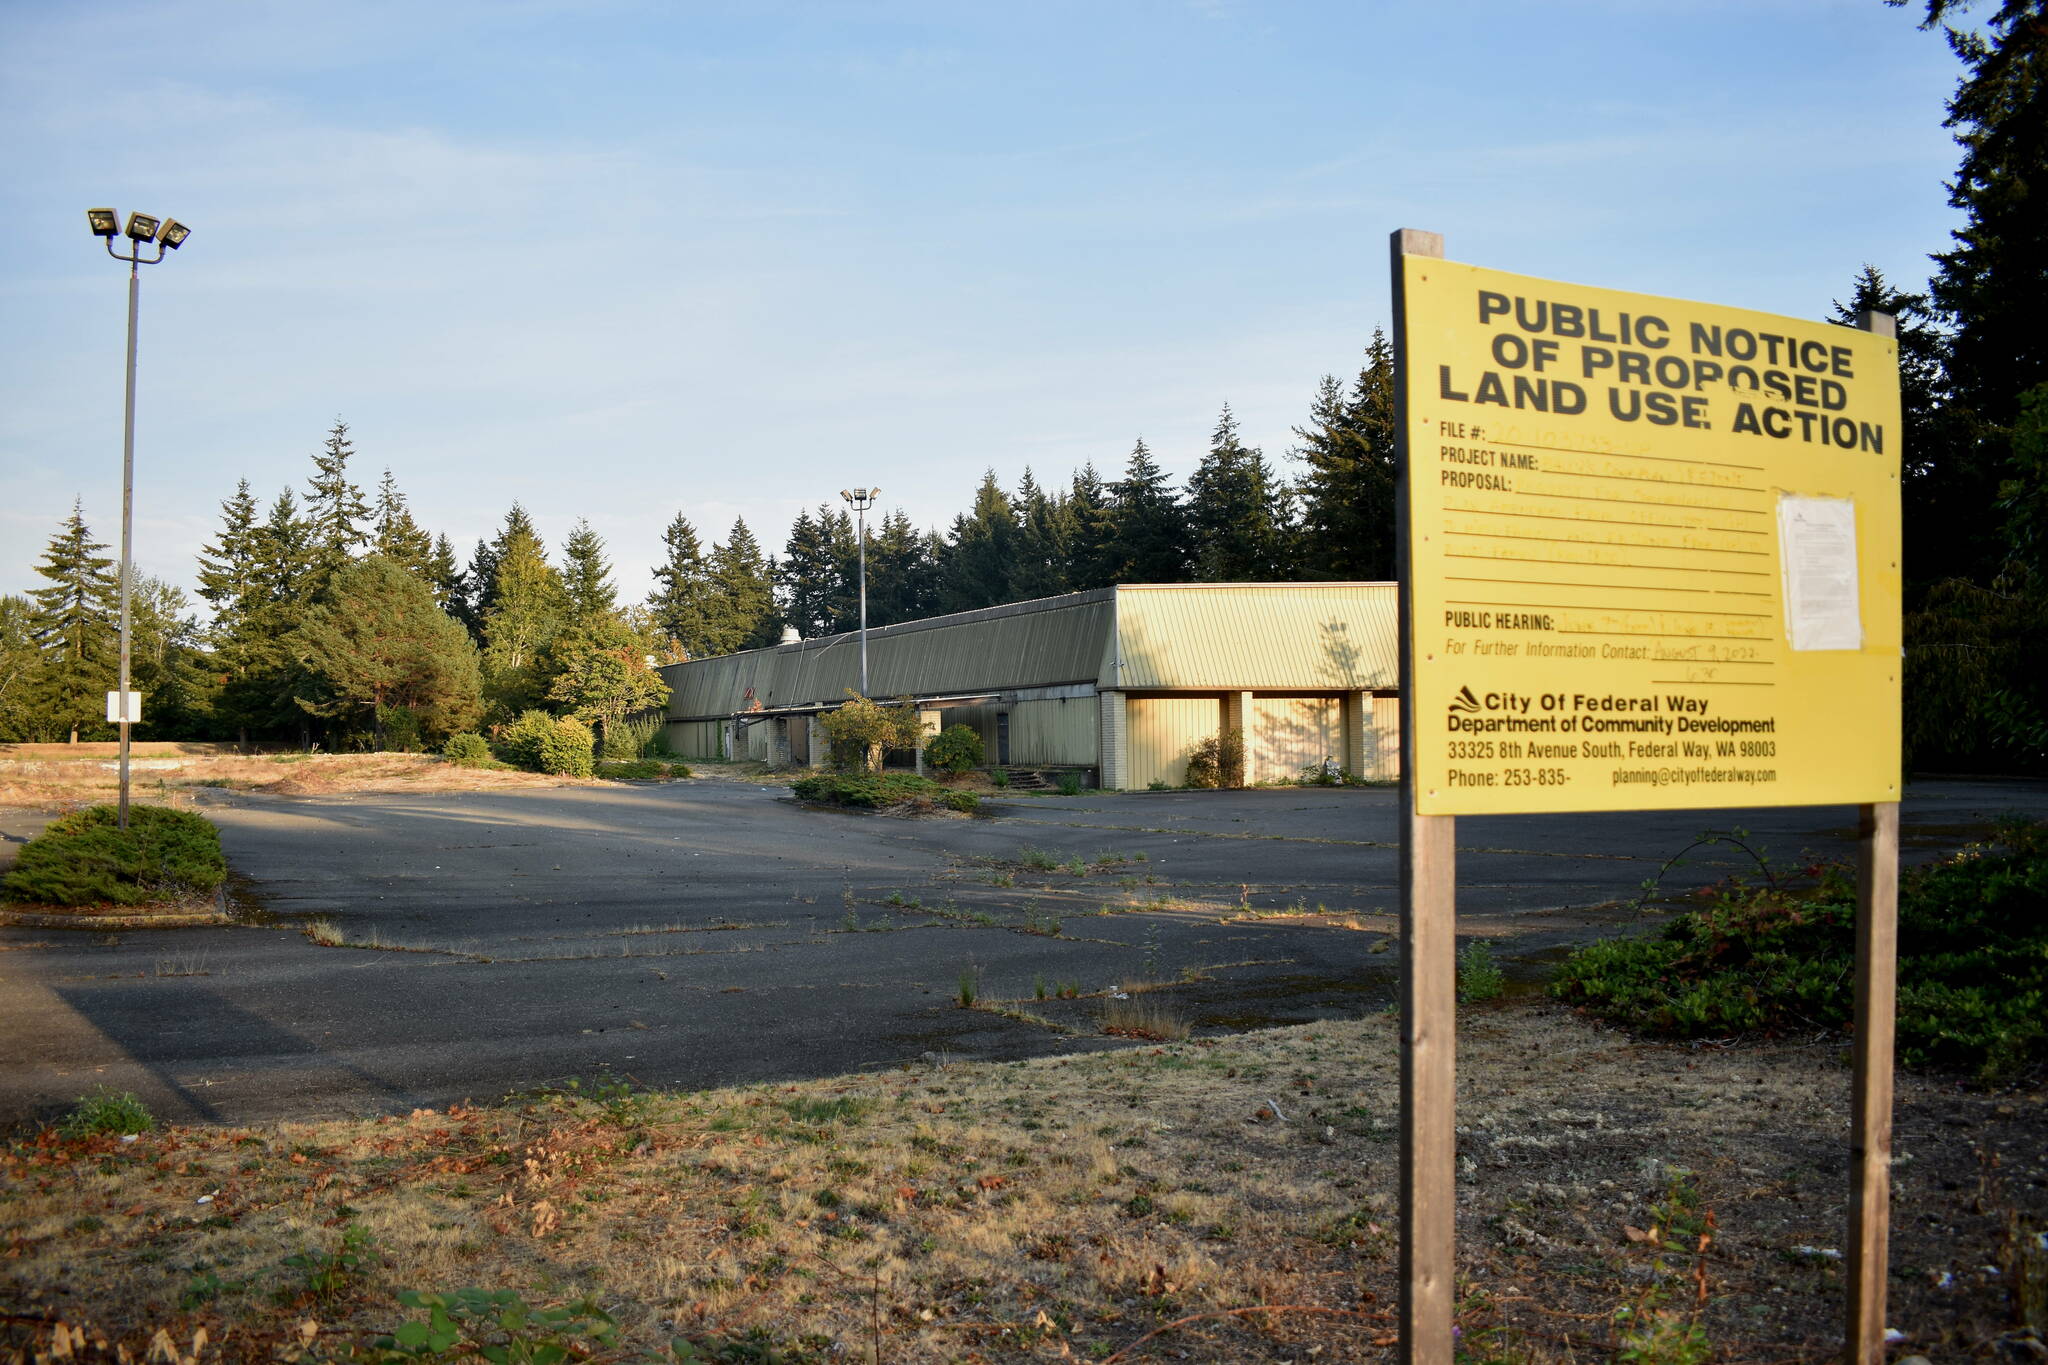 Photo by Alex Bruell/the Mirror
The former Bally Total Fitness property in Federal Way sits vacant, but if the city council signs off on a new townhouse development, the building could be replaced with new homes in just a few years.